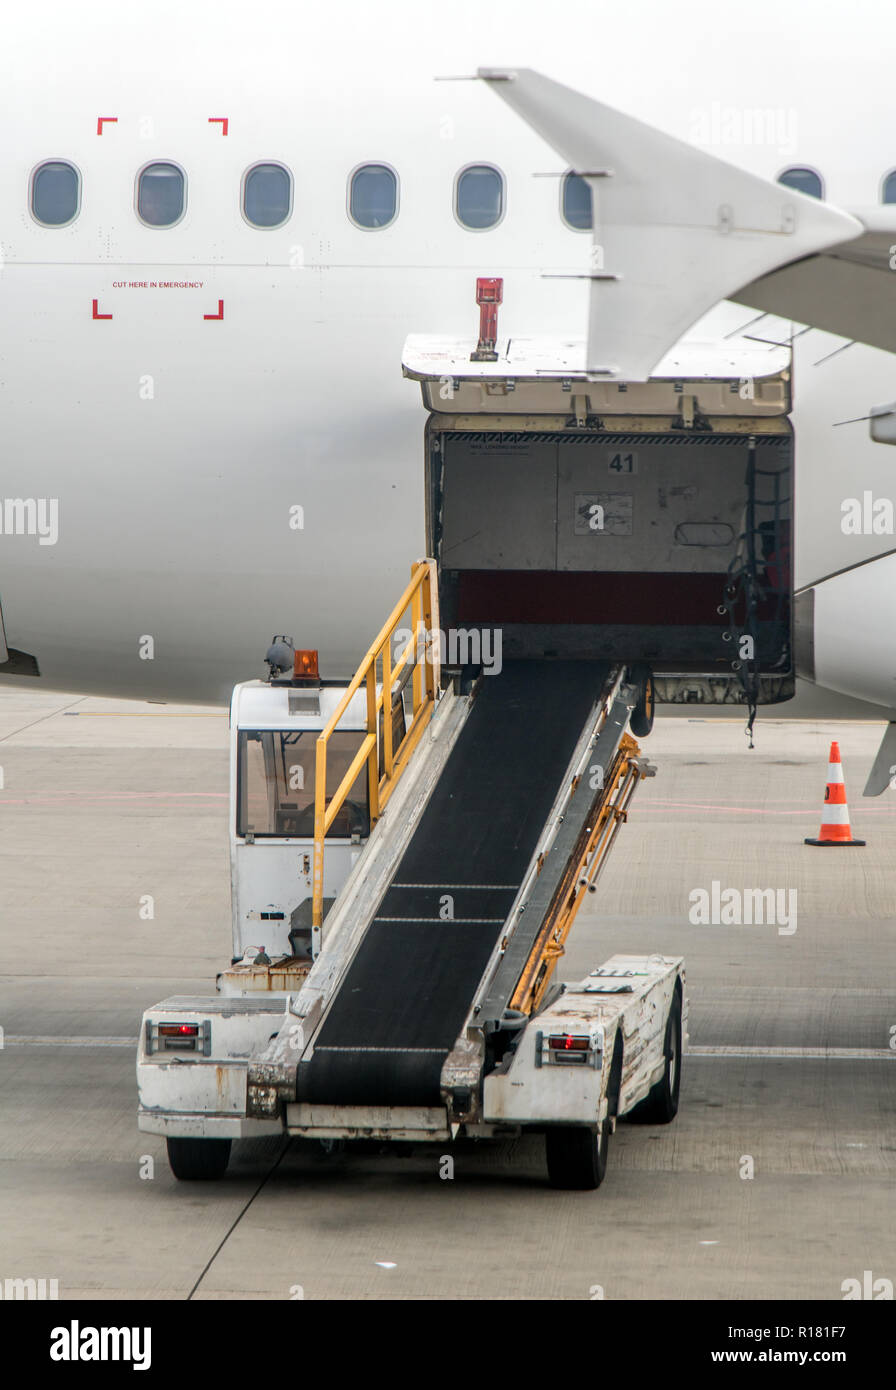 The cargo space of the aircraft is open. The vehicle with conveyor for freight standing beside an empty plane. Stock Photo